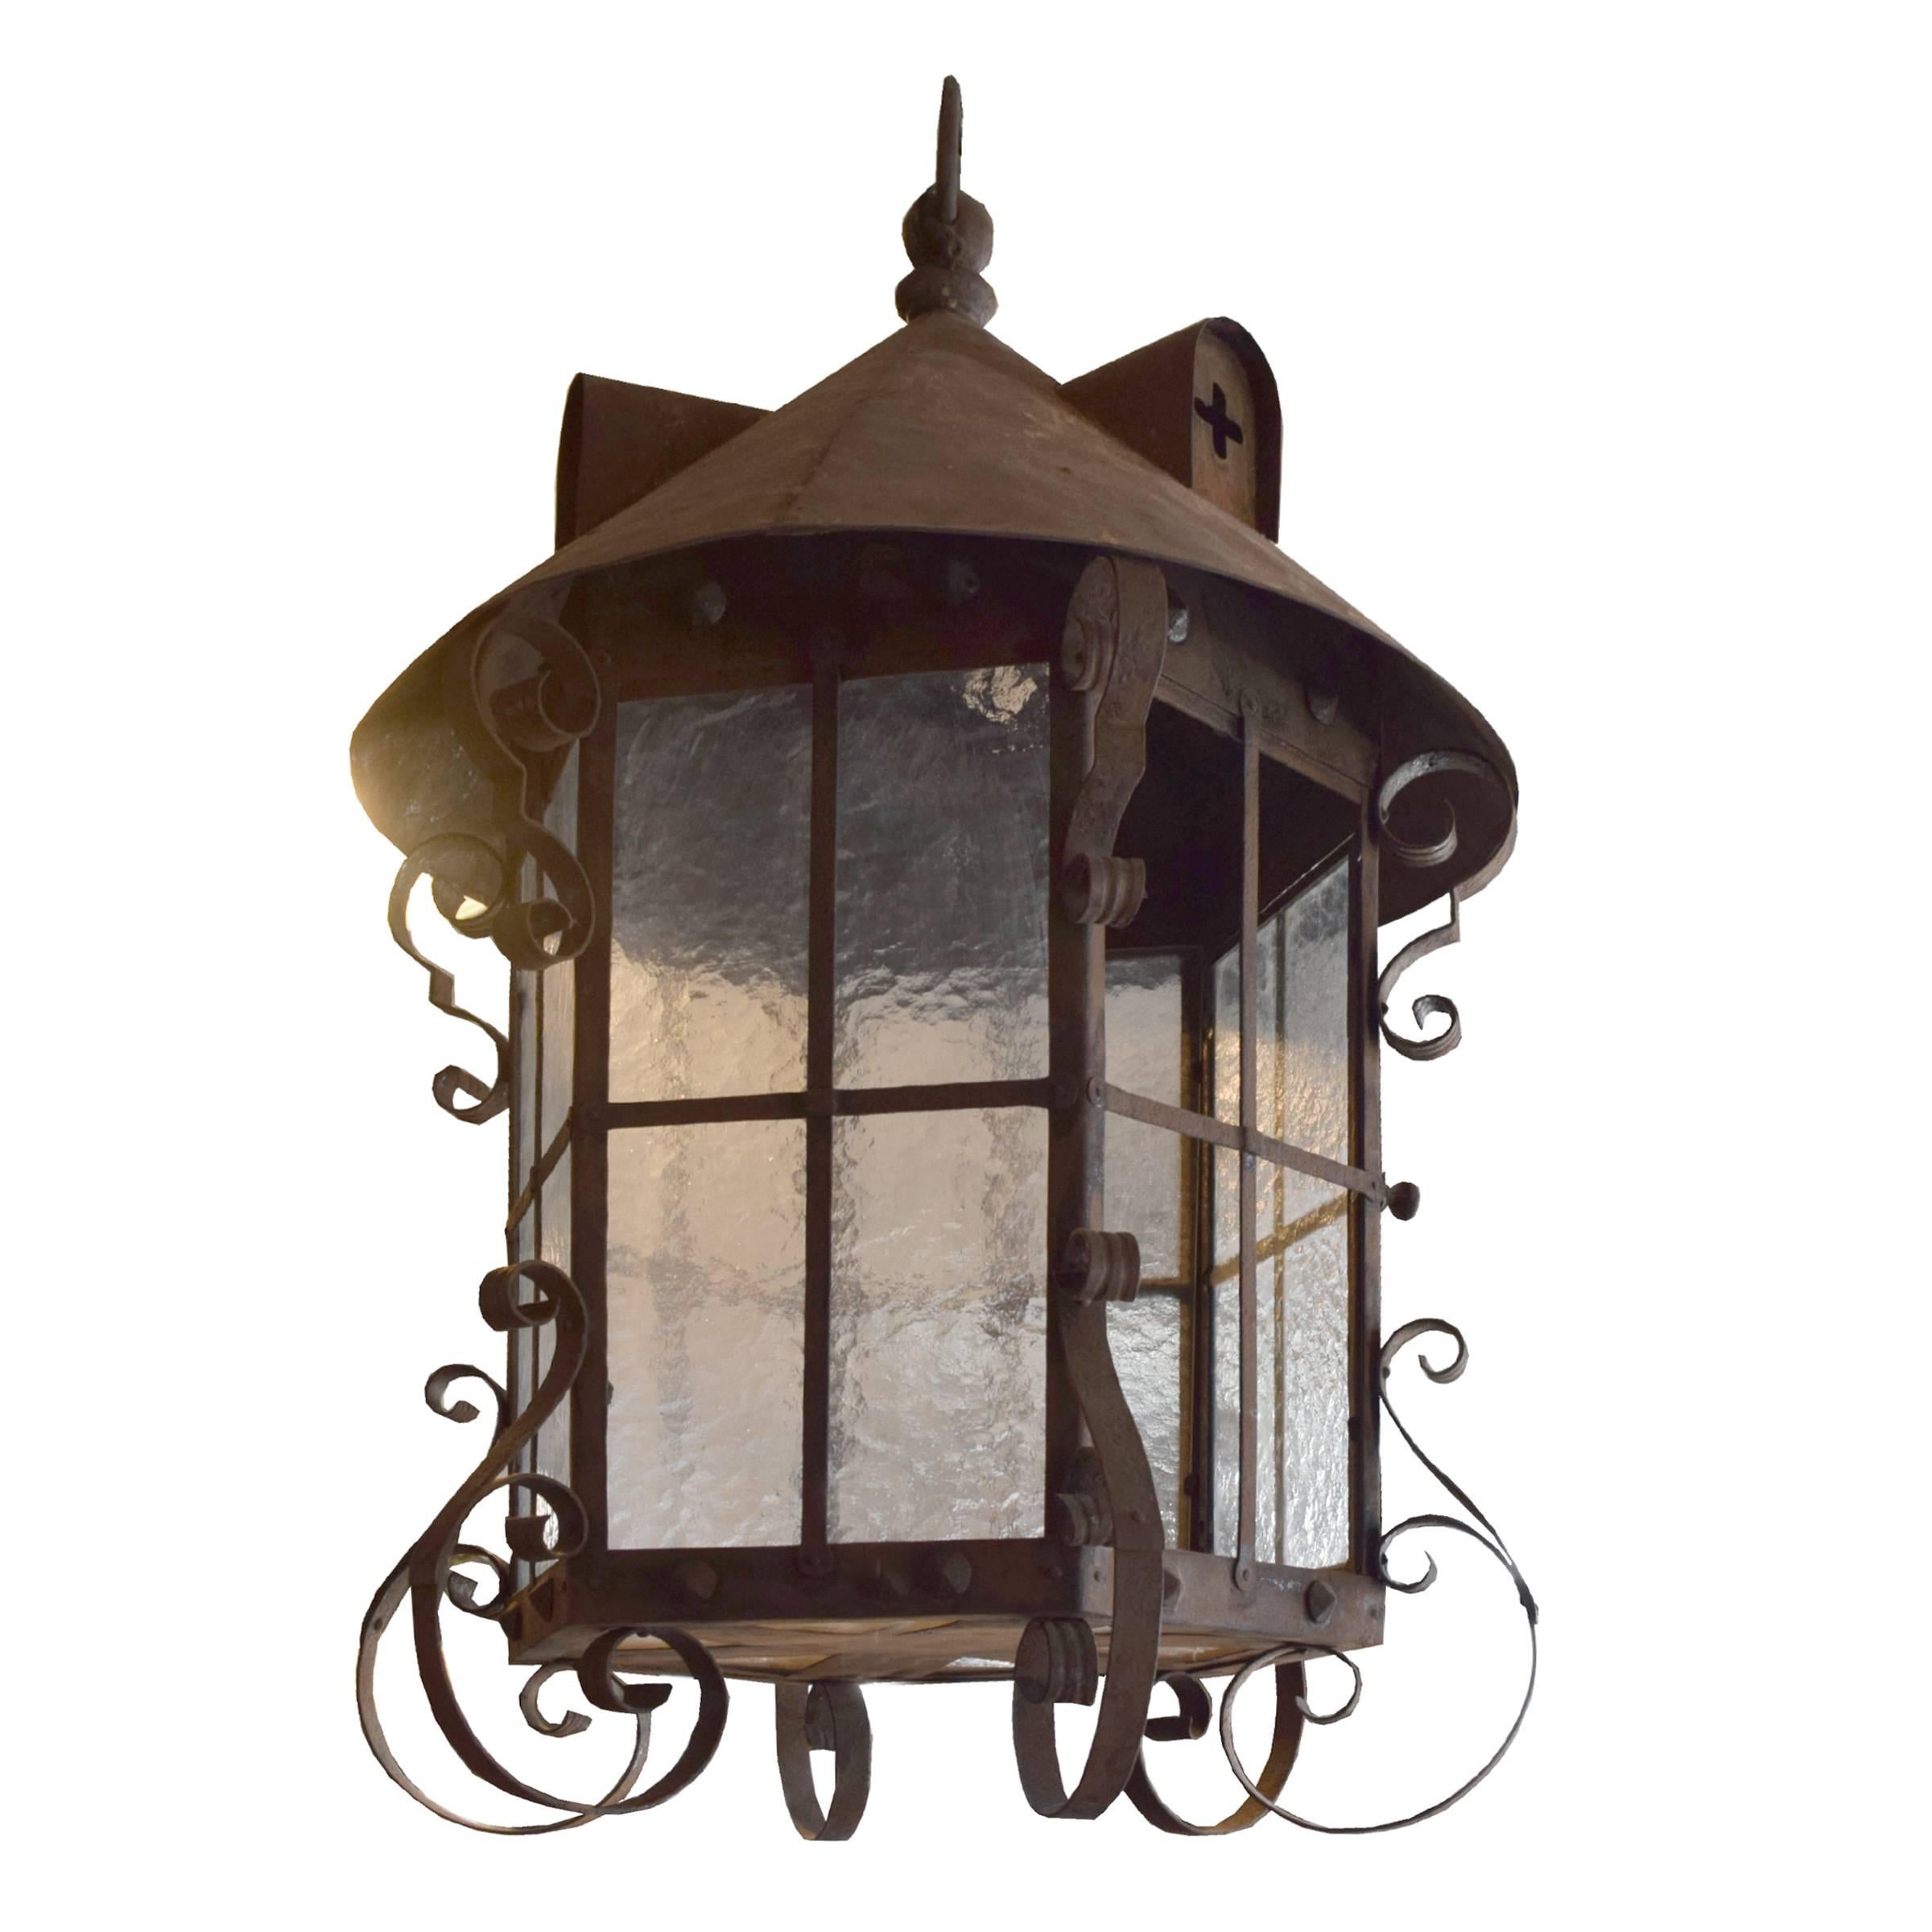 A six-sided wrought iron lantern with hammered glass shades from the Argentine estate of José Thenee. Thenee is considered one of the greatest blacksmiths and won a world title in 1923.
 